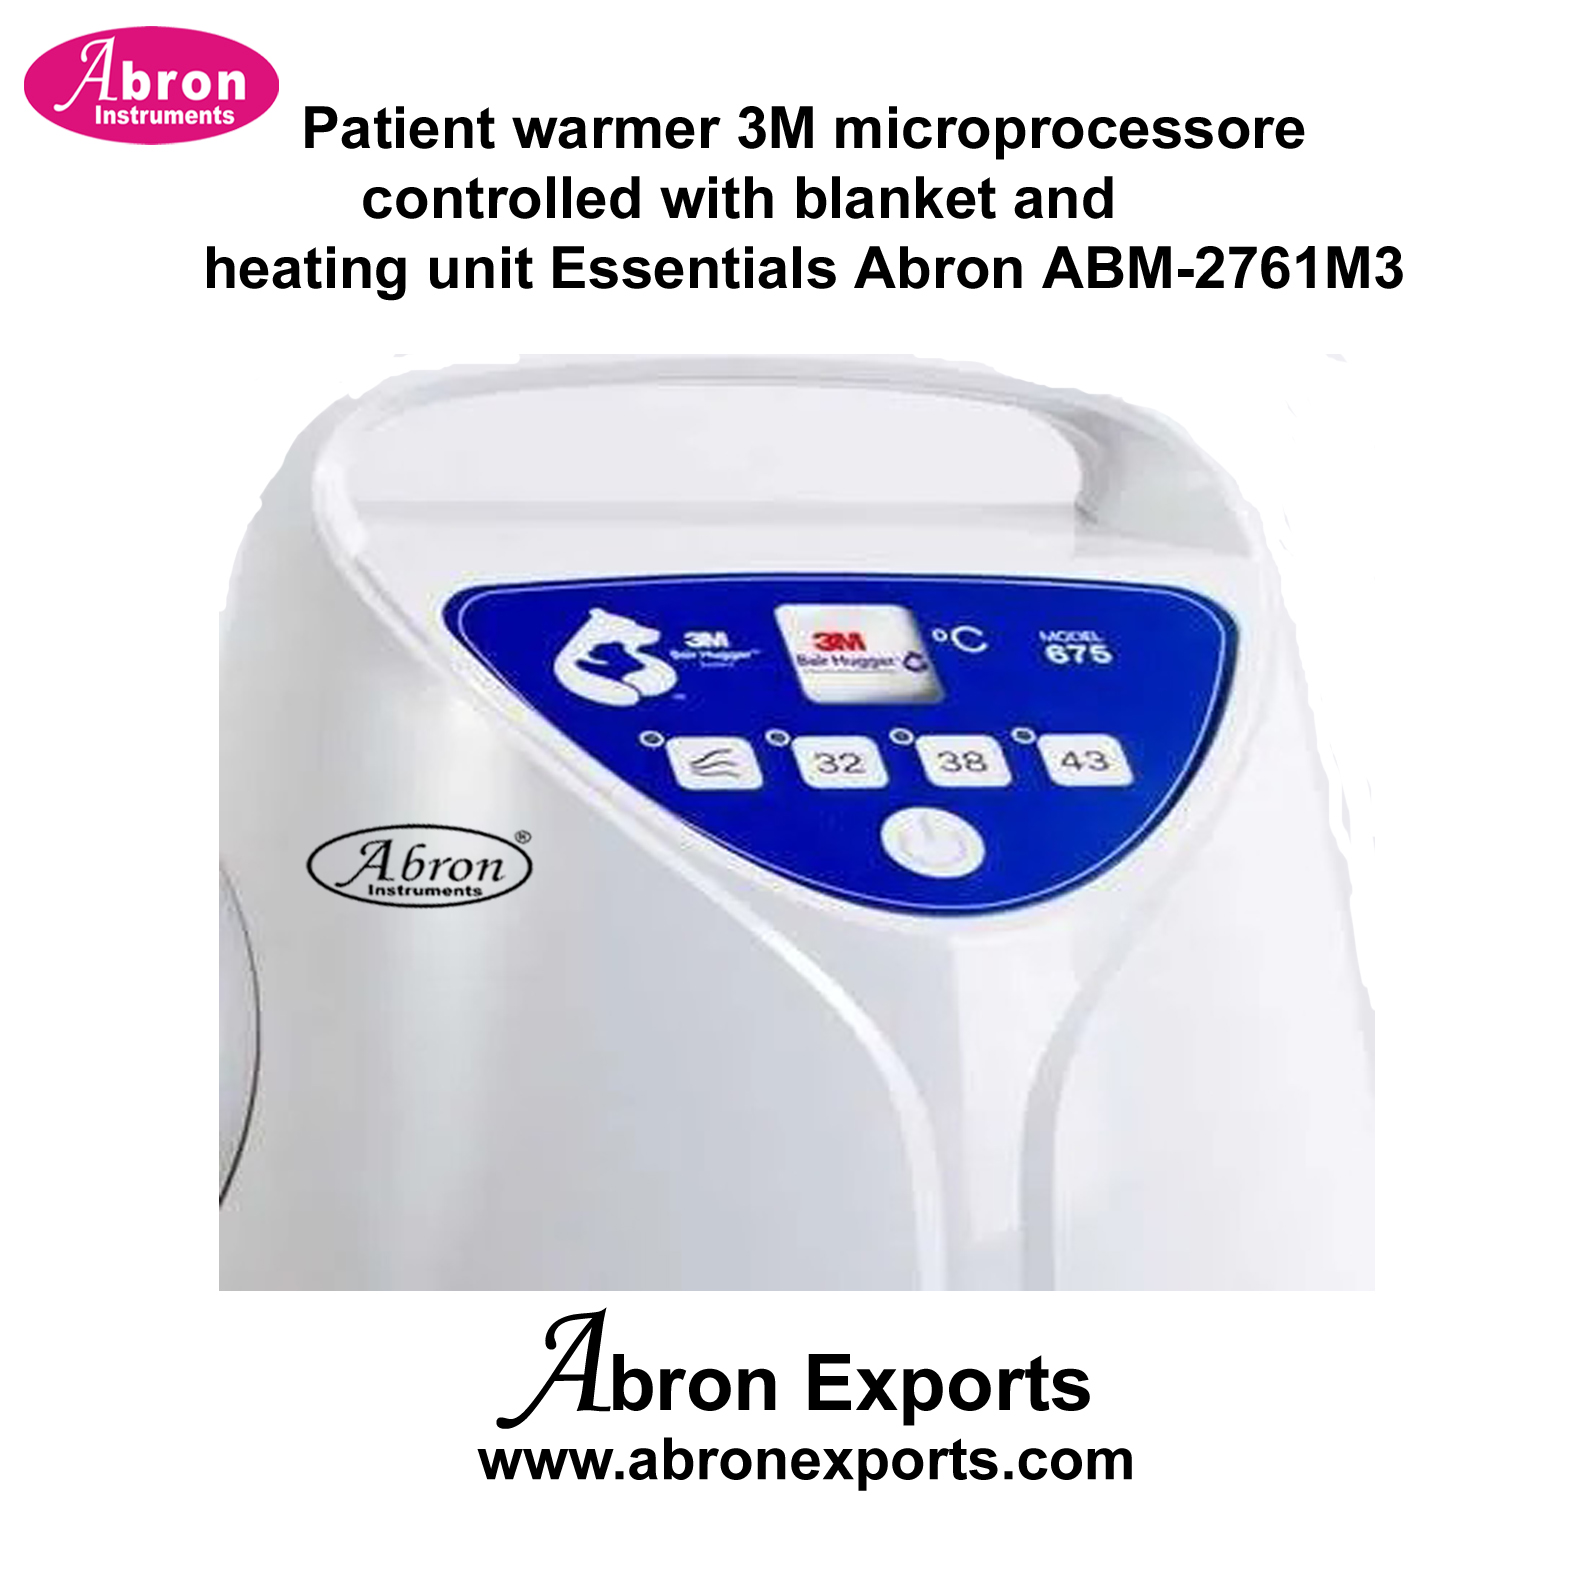 Patient warmer 3M microprocessore controlled with blanket and heating unit Essentials Abron ABM-2761M3 